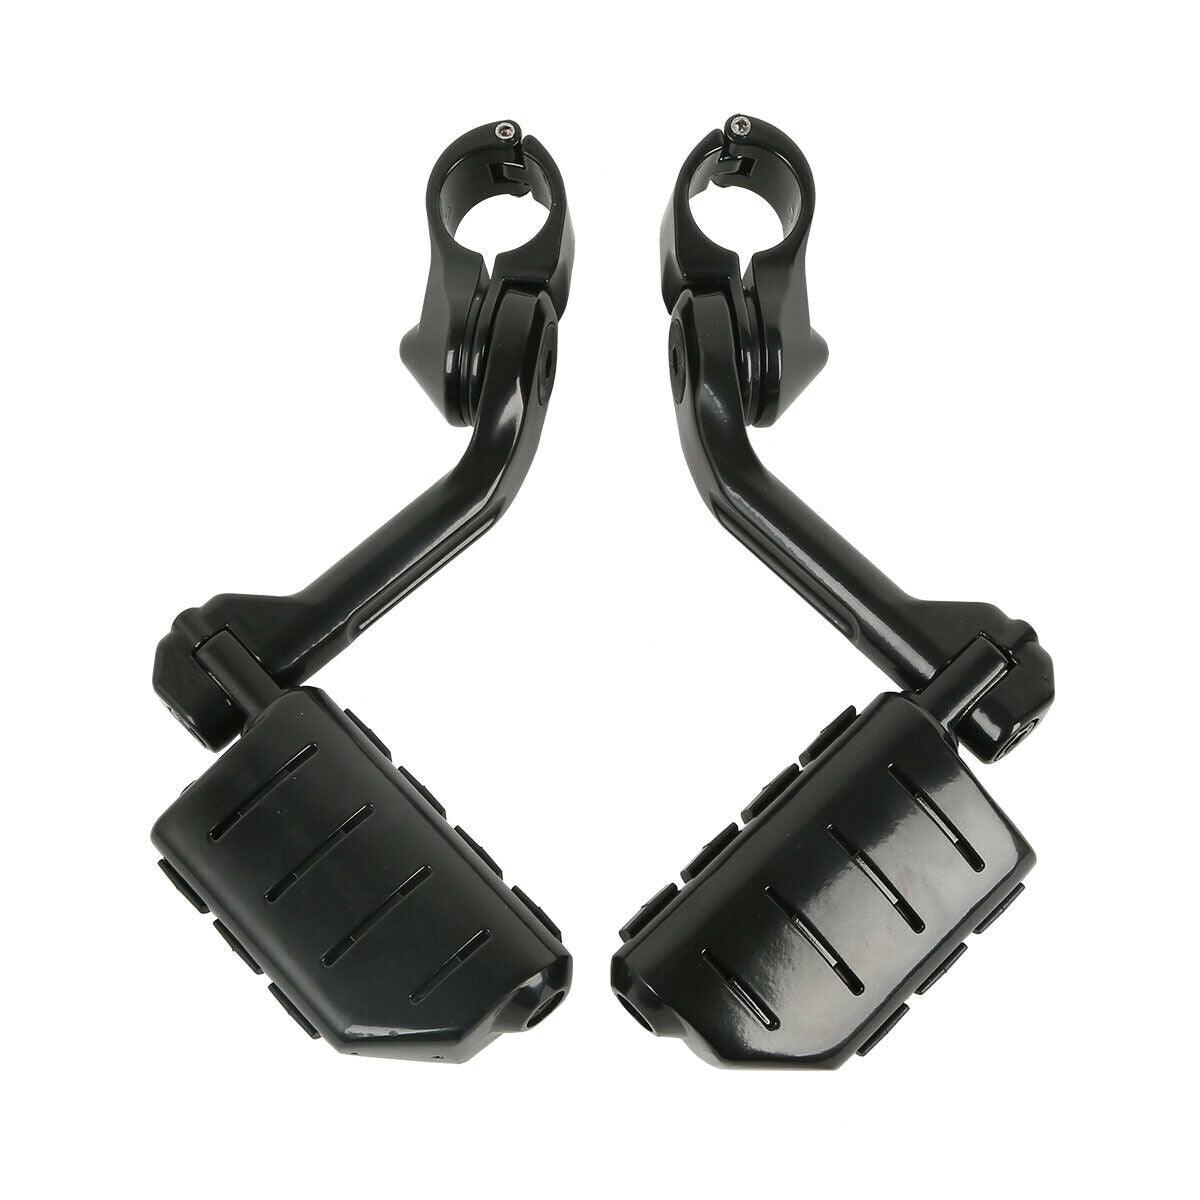 1 1/4" Engine Guard Long Angled Foot Pegs Mount Fit For Harley Sportster Black - Moto Life Products